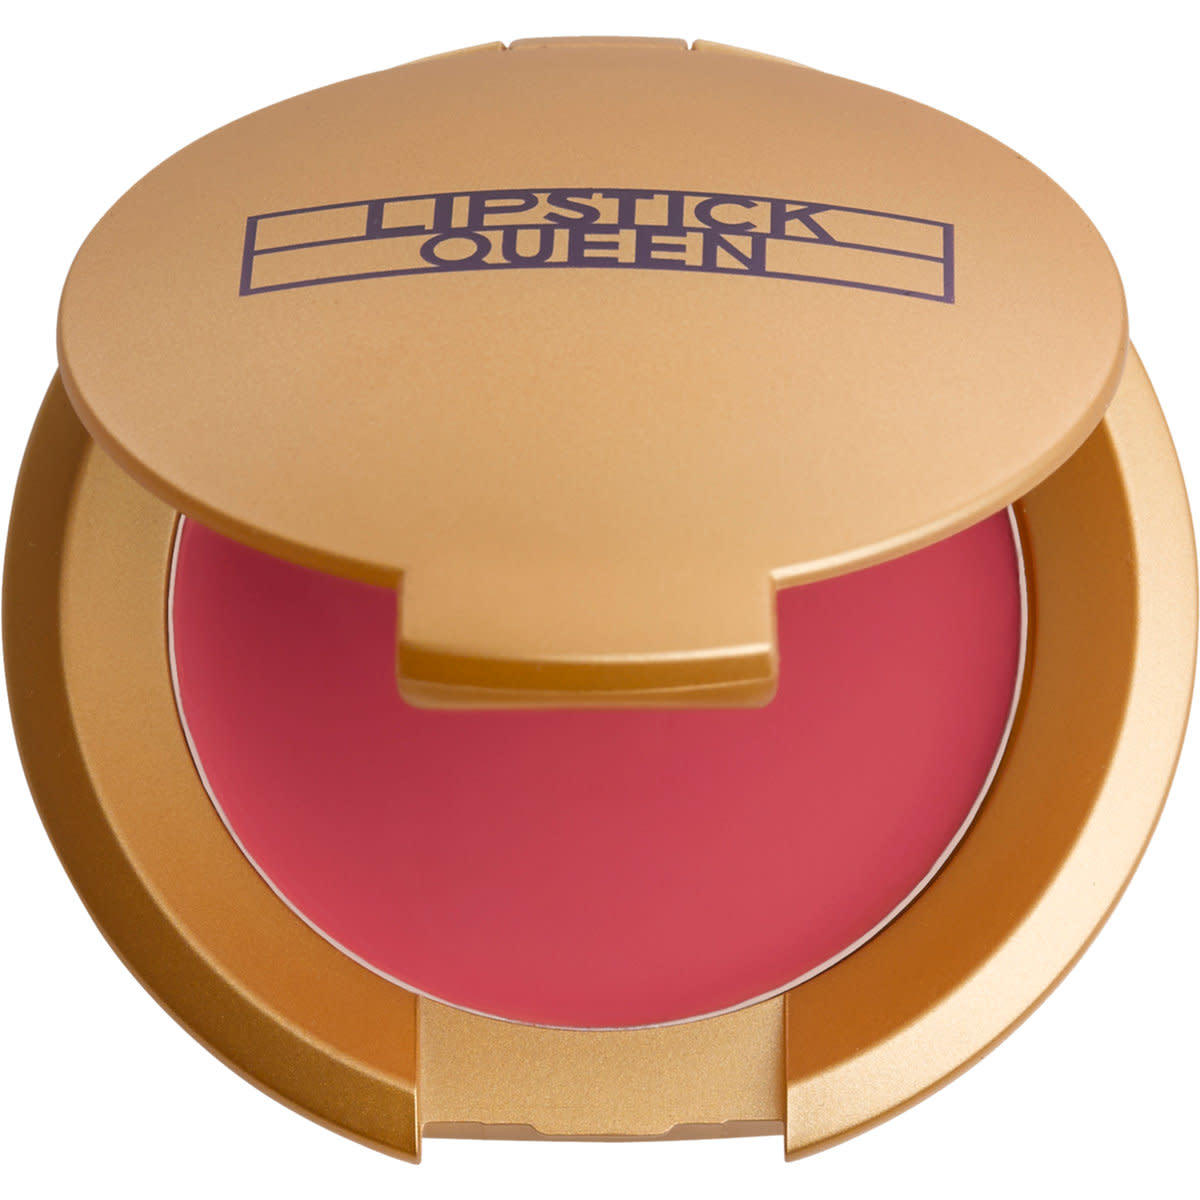 Put On This Lip & Cheek Tint, and Prepare for Compliments